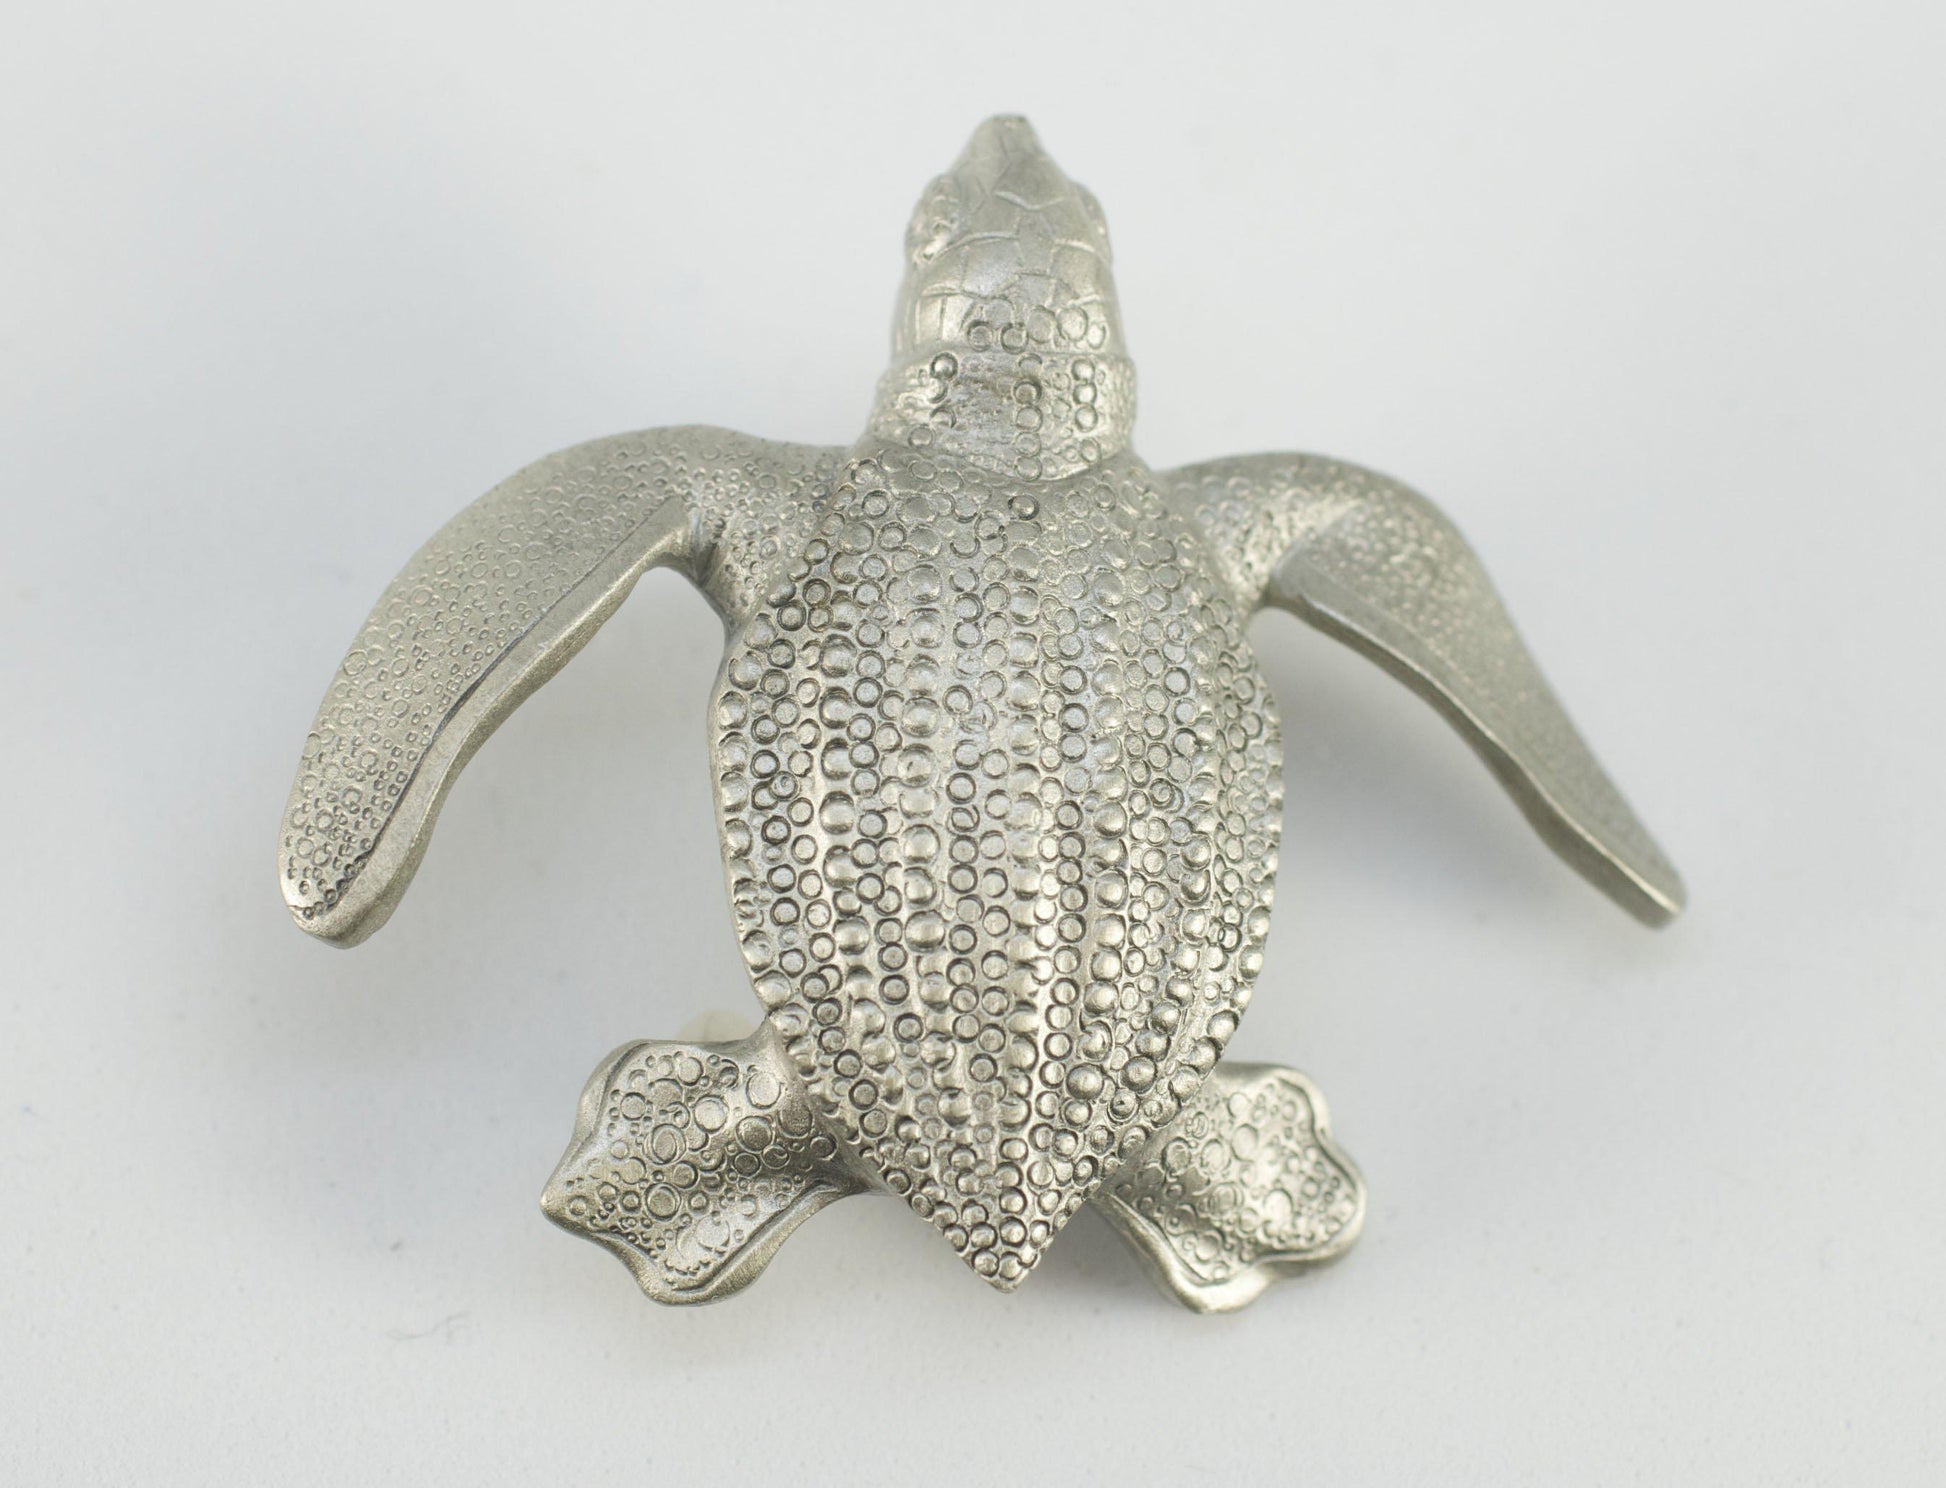 Leatherback Turtle Pin, Hatchling Sea Life  Lead Free Pewter Pin - The Tool Store